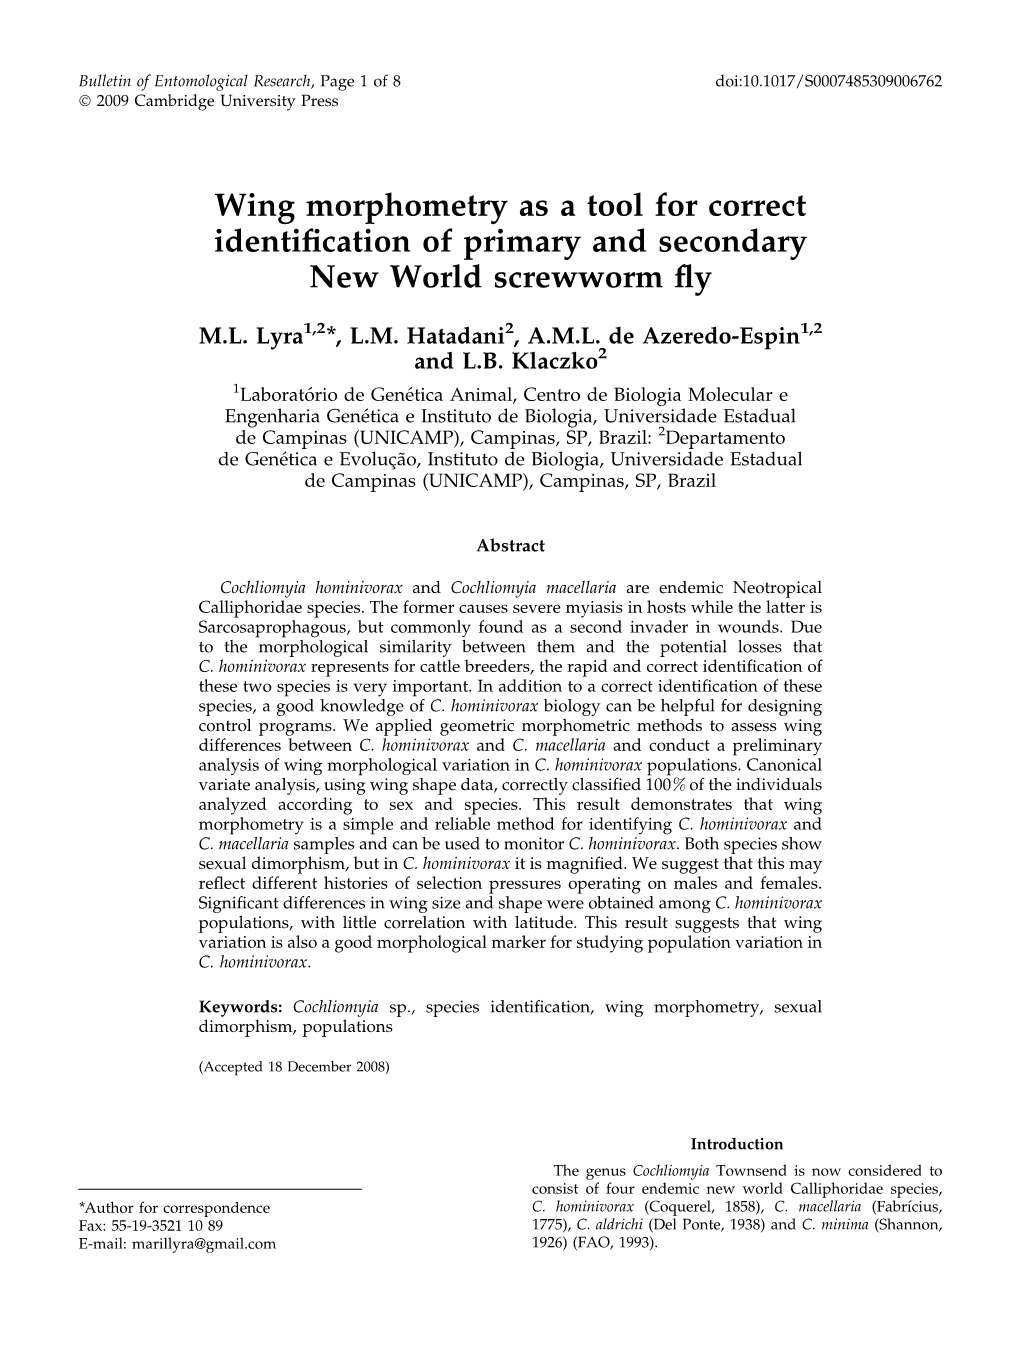 Wing Morphometry As a Tool for Correct Identification of Primary And